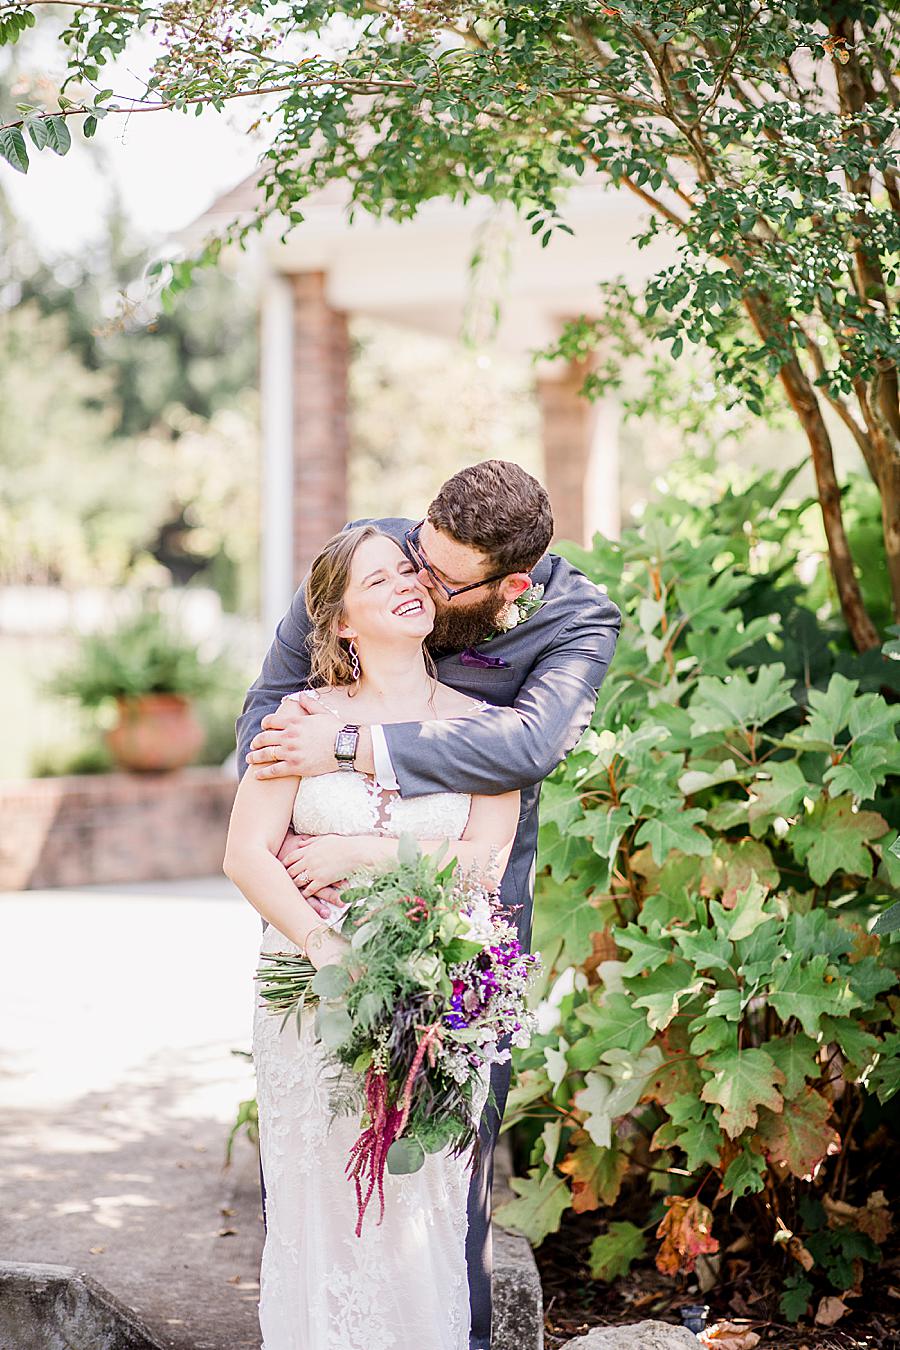 Kiss on the cheek at this Hunter Valley Pavilion wedding by Knoxville Wedding Photographer, Amanda May Photos.